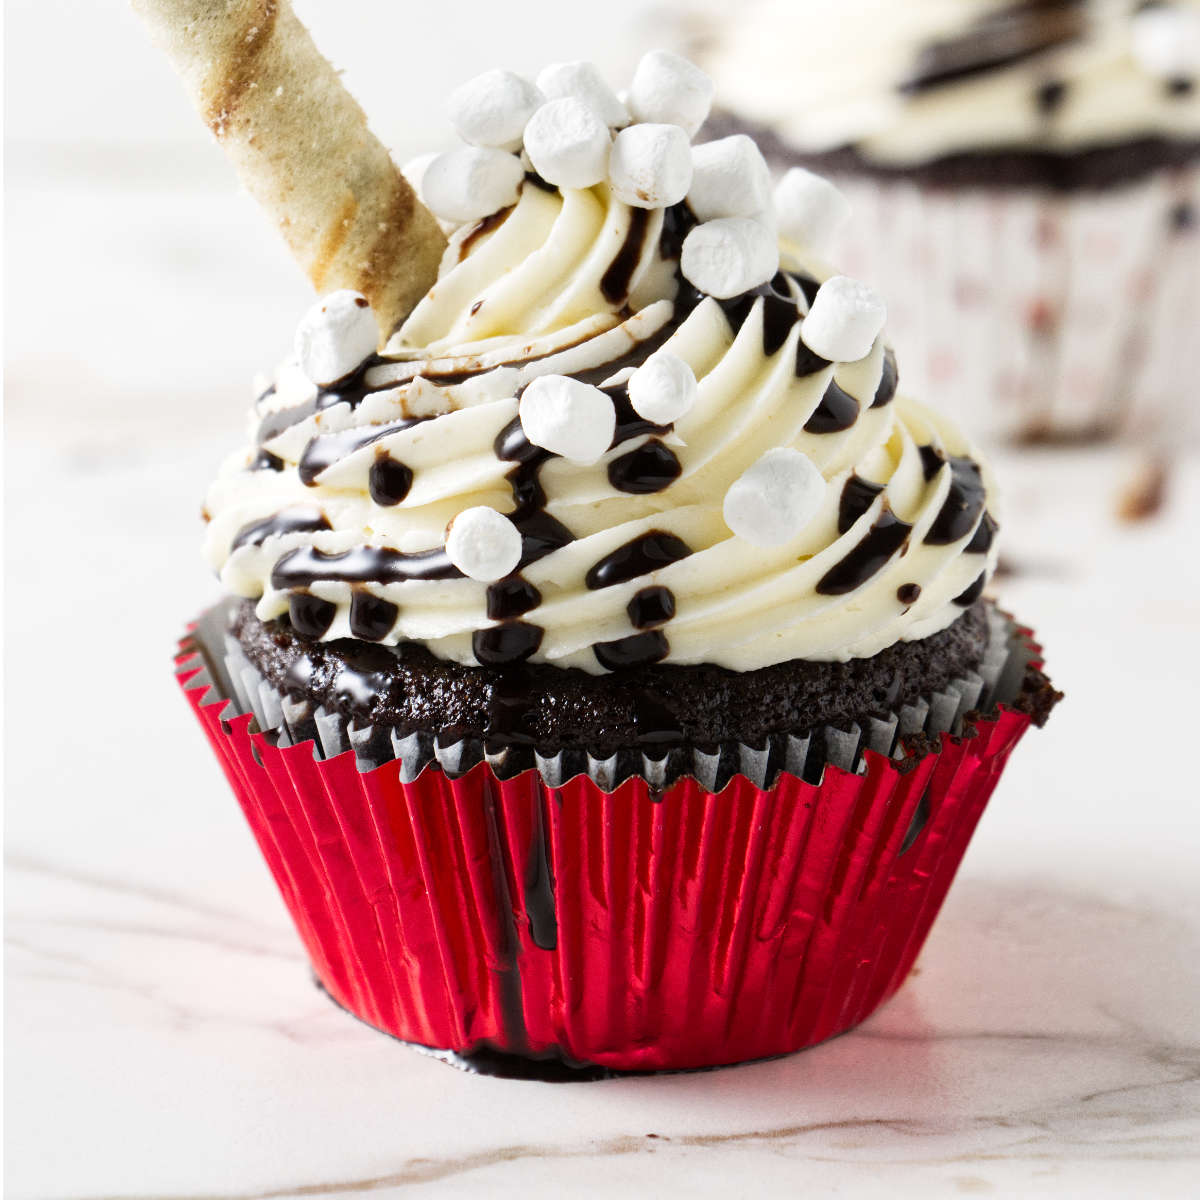 Chocolate with buttercream, chocolate drizzle, and miniature marshmallows.